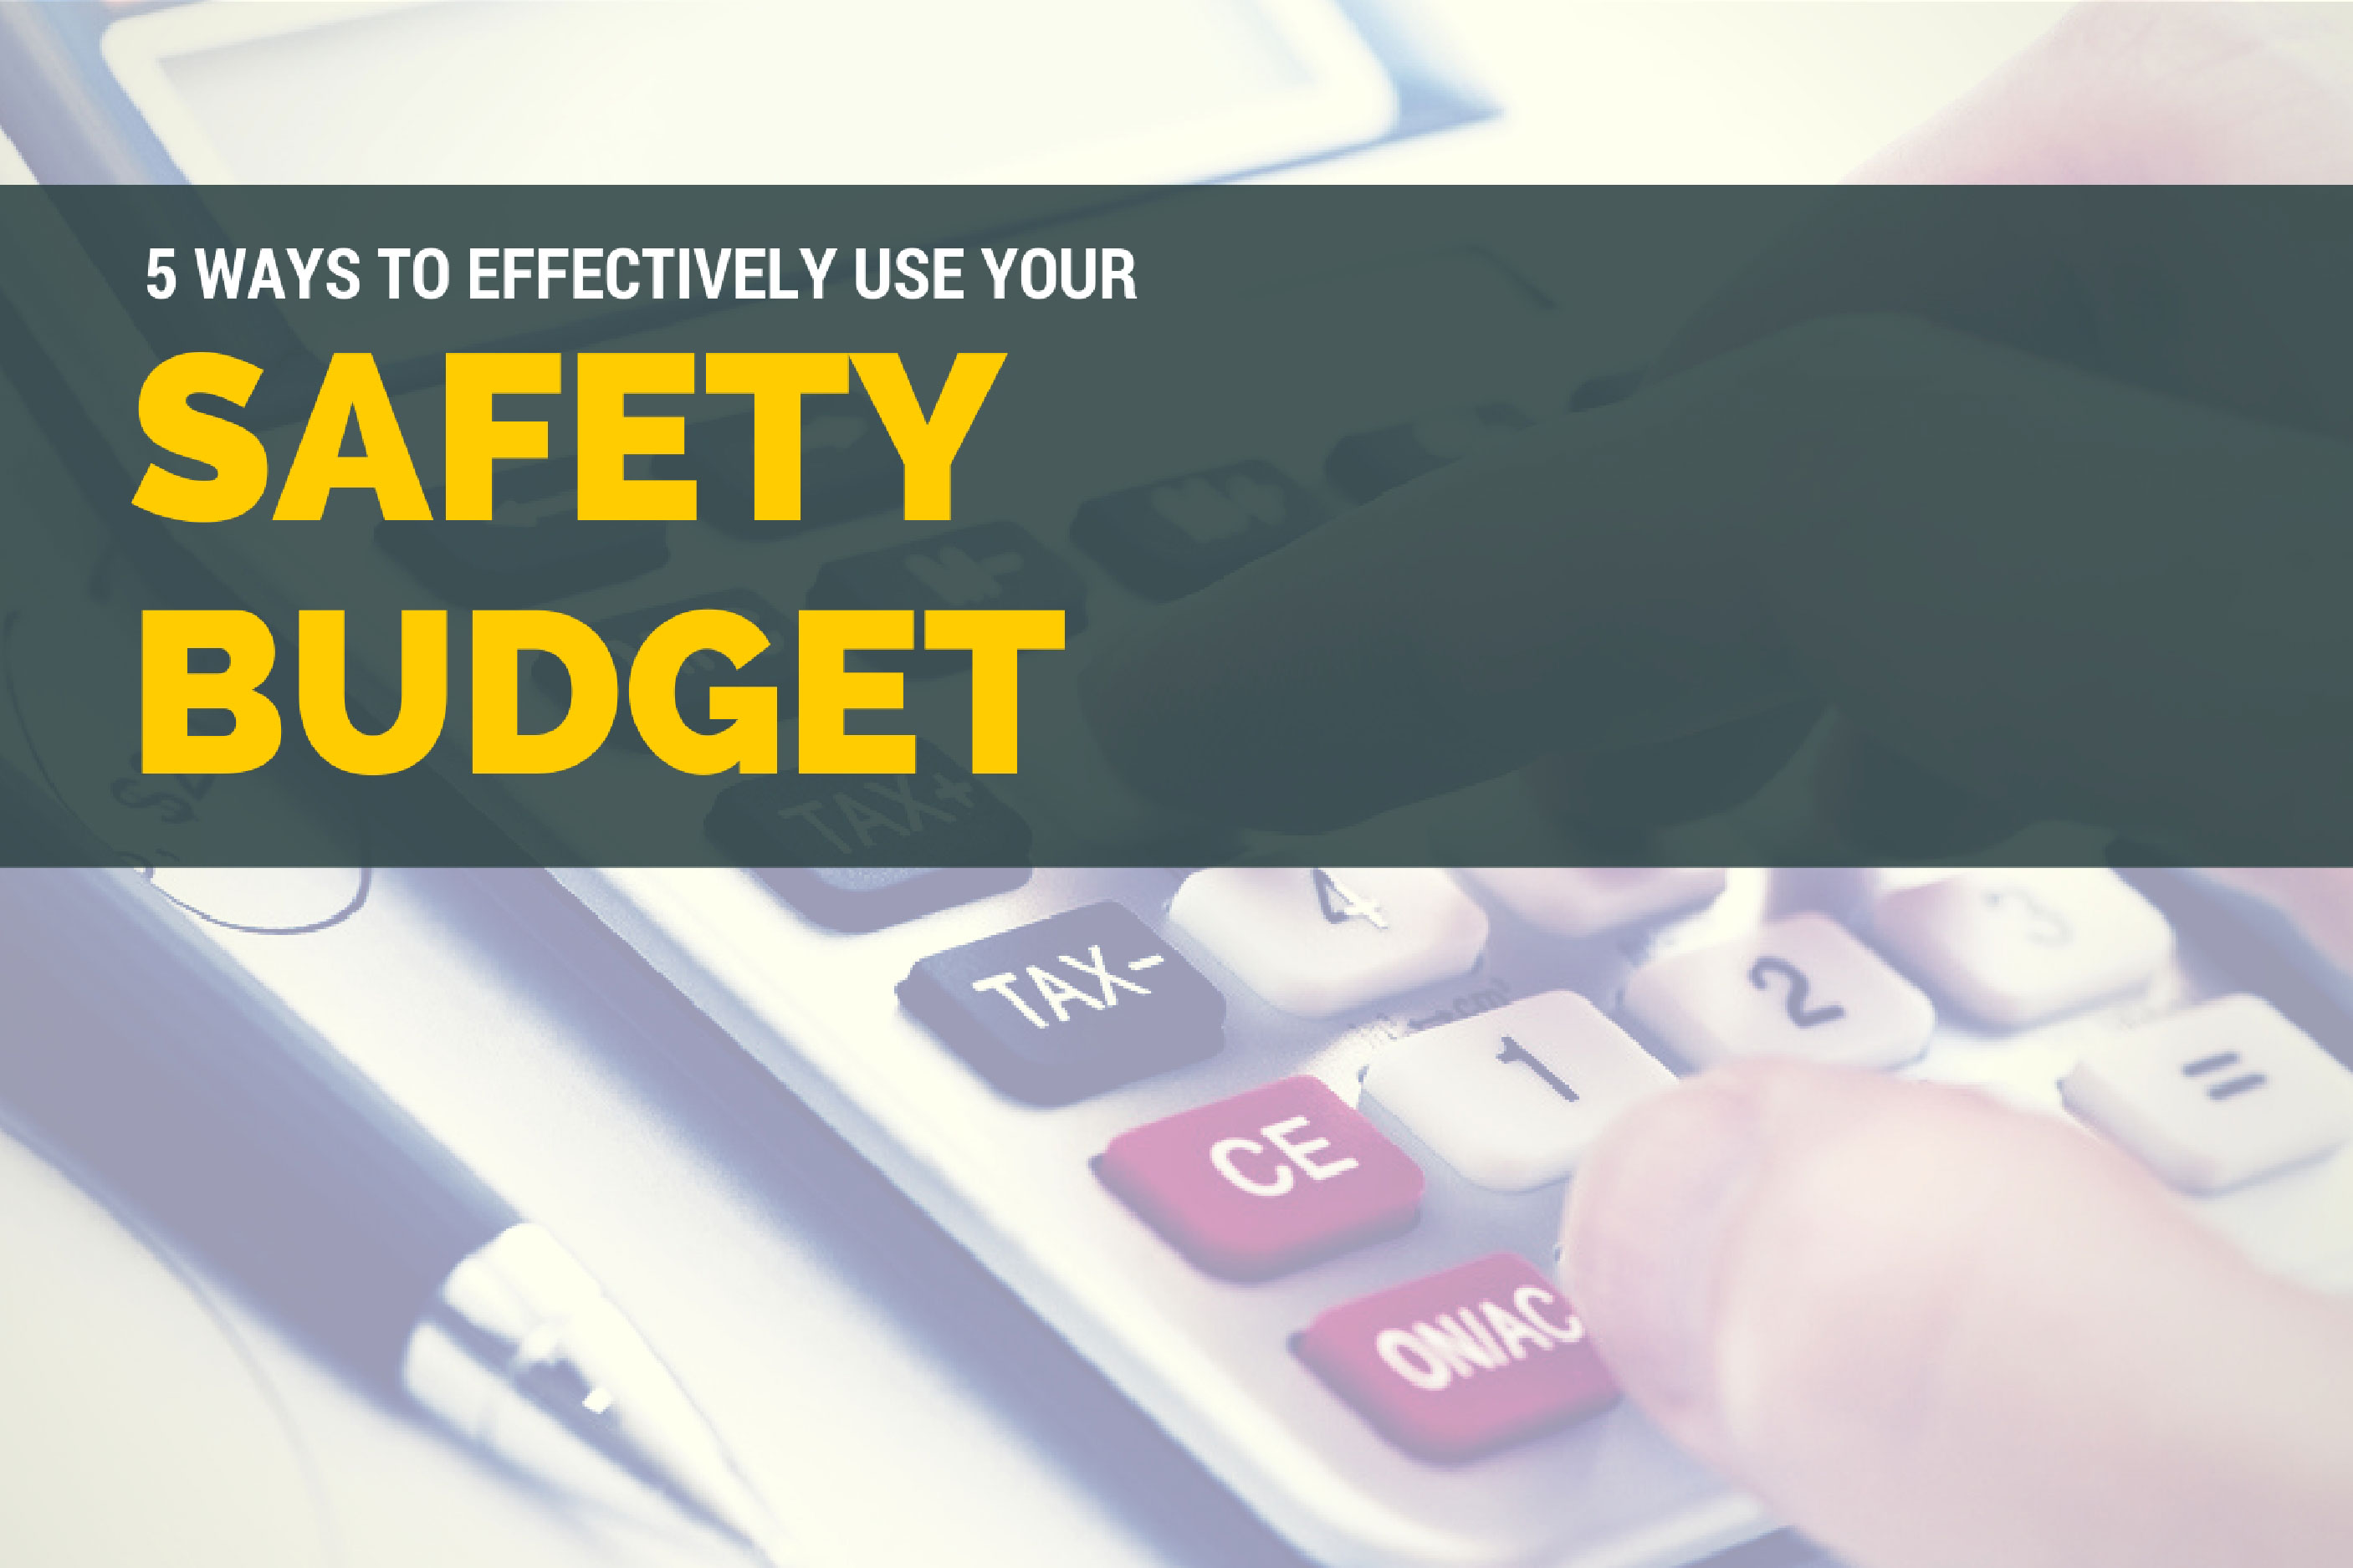 5 Ways to Effectively Use Your Safety Budget